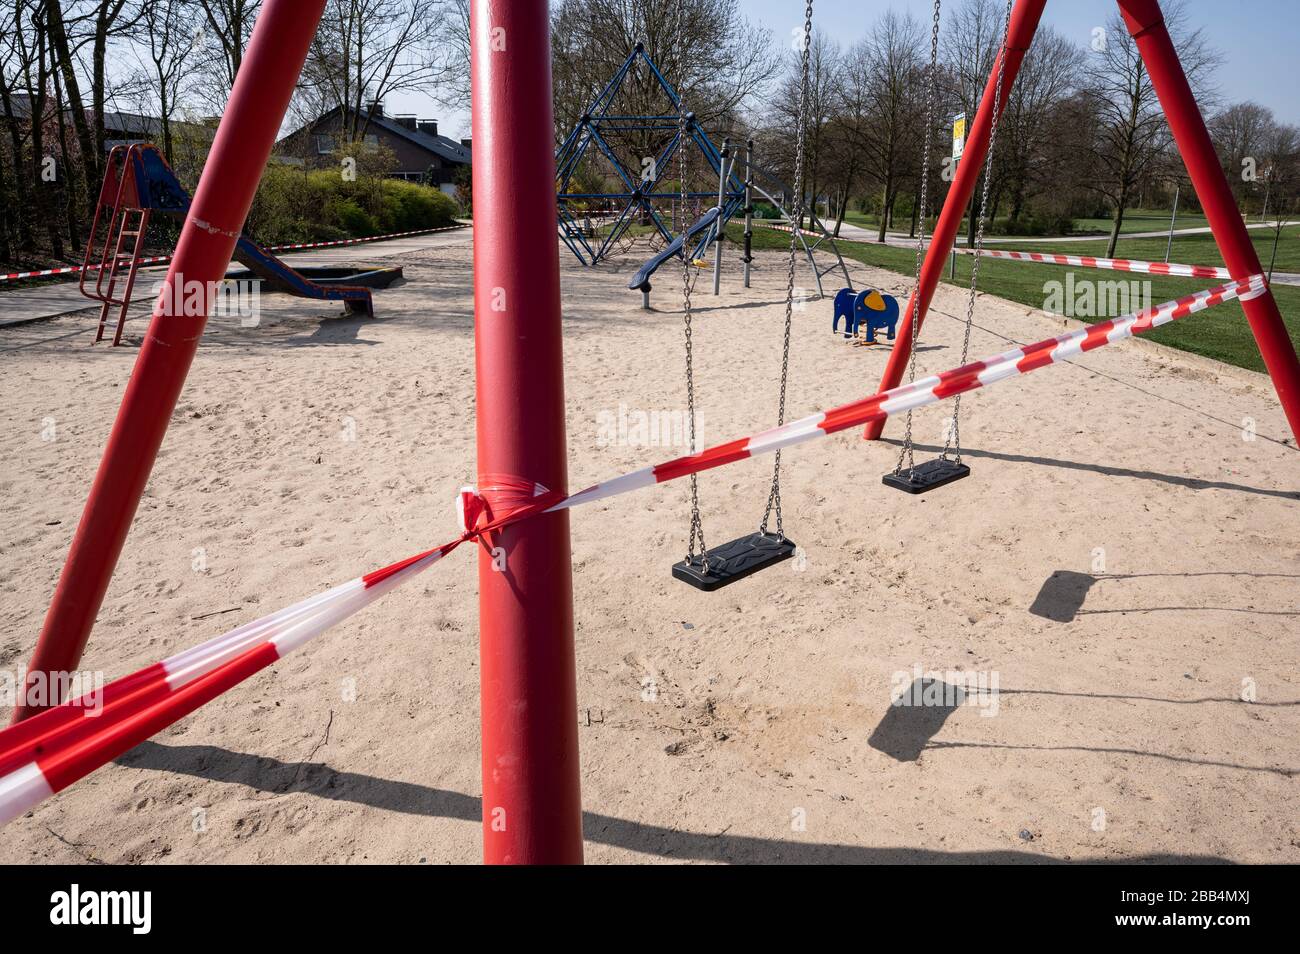 Safety measures: A children's playground is closed to avoid spreading of the virus / covid-19 disease during coronavirus pandemic Stock Photo